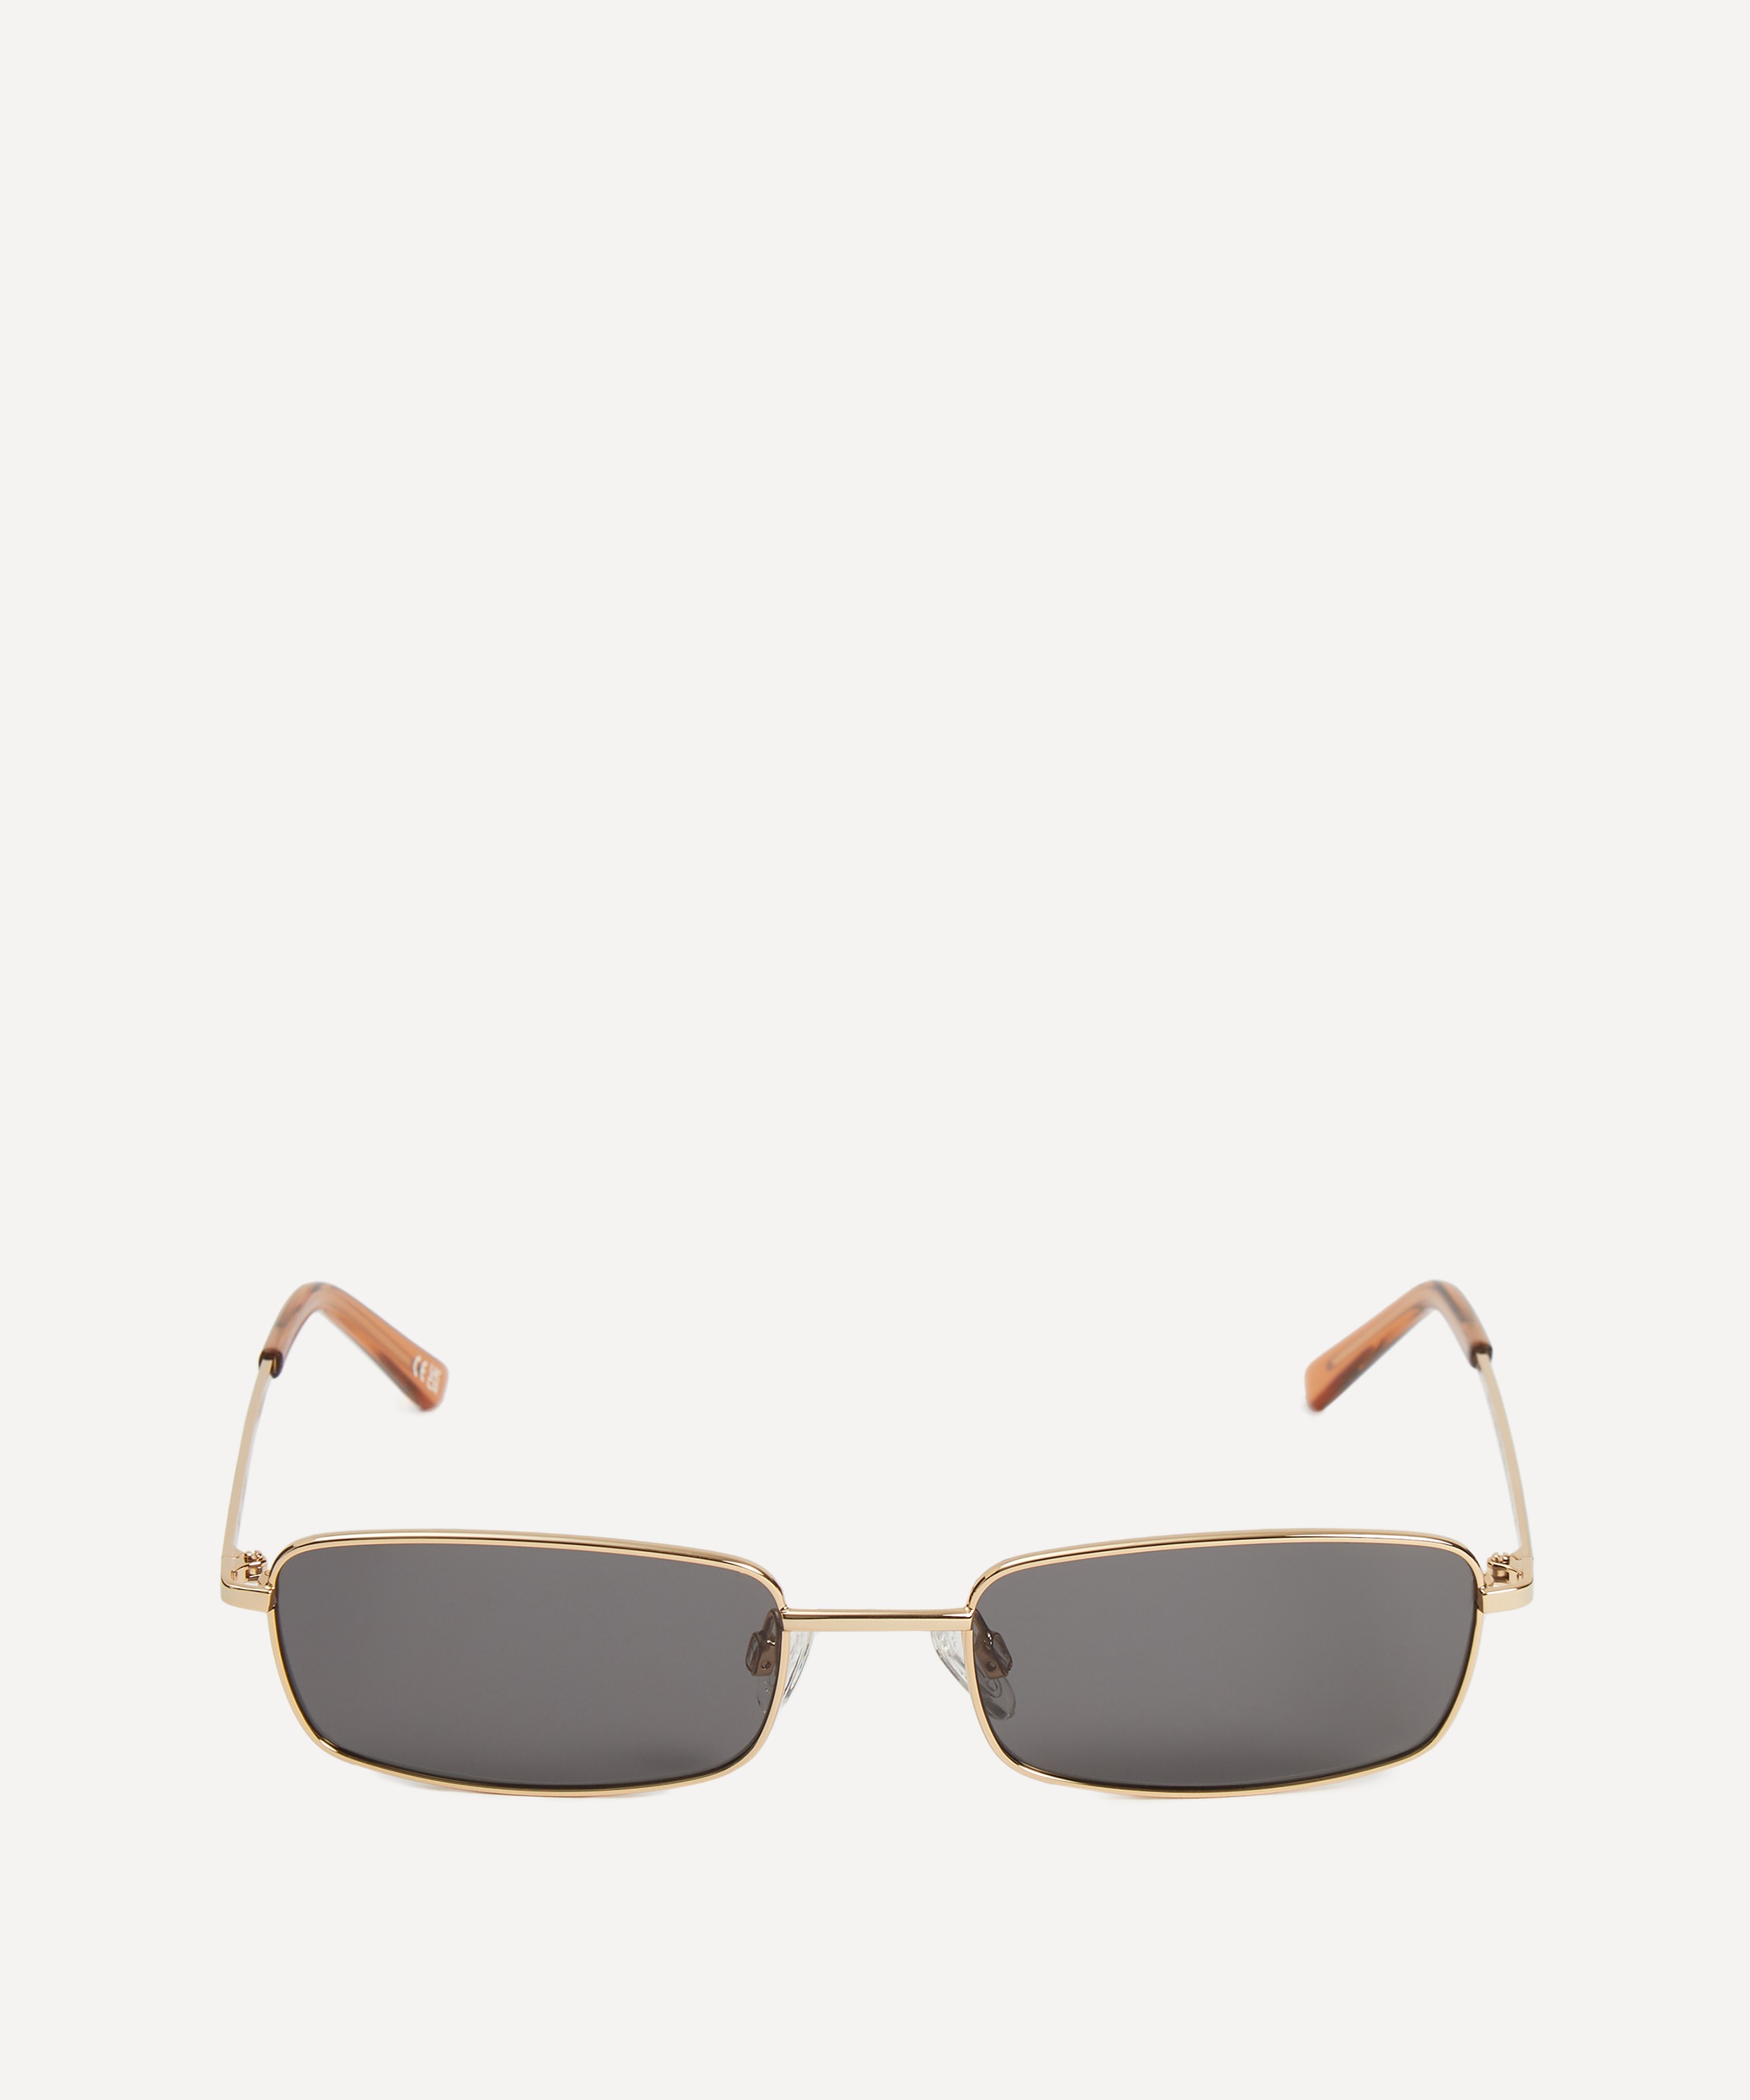 DMY BY DMY - Olsen Rectangle Sunglasses image number 0